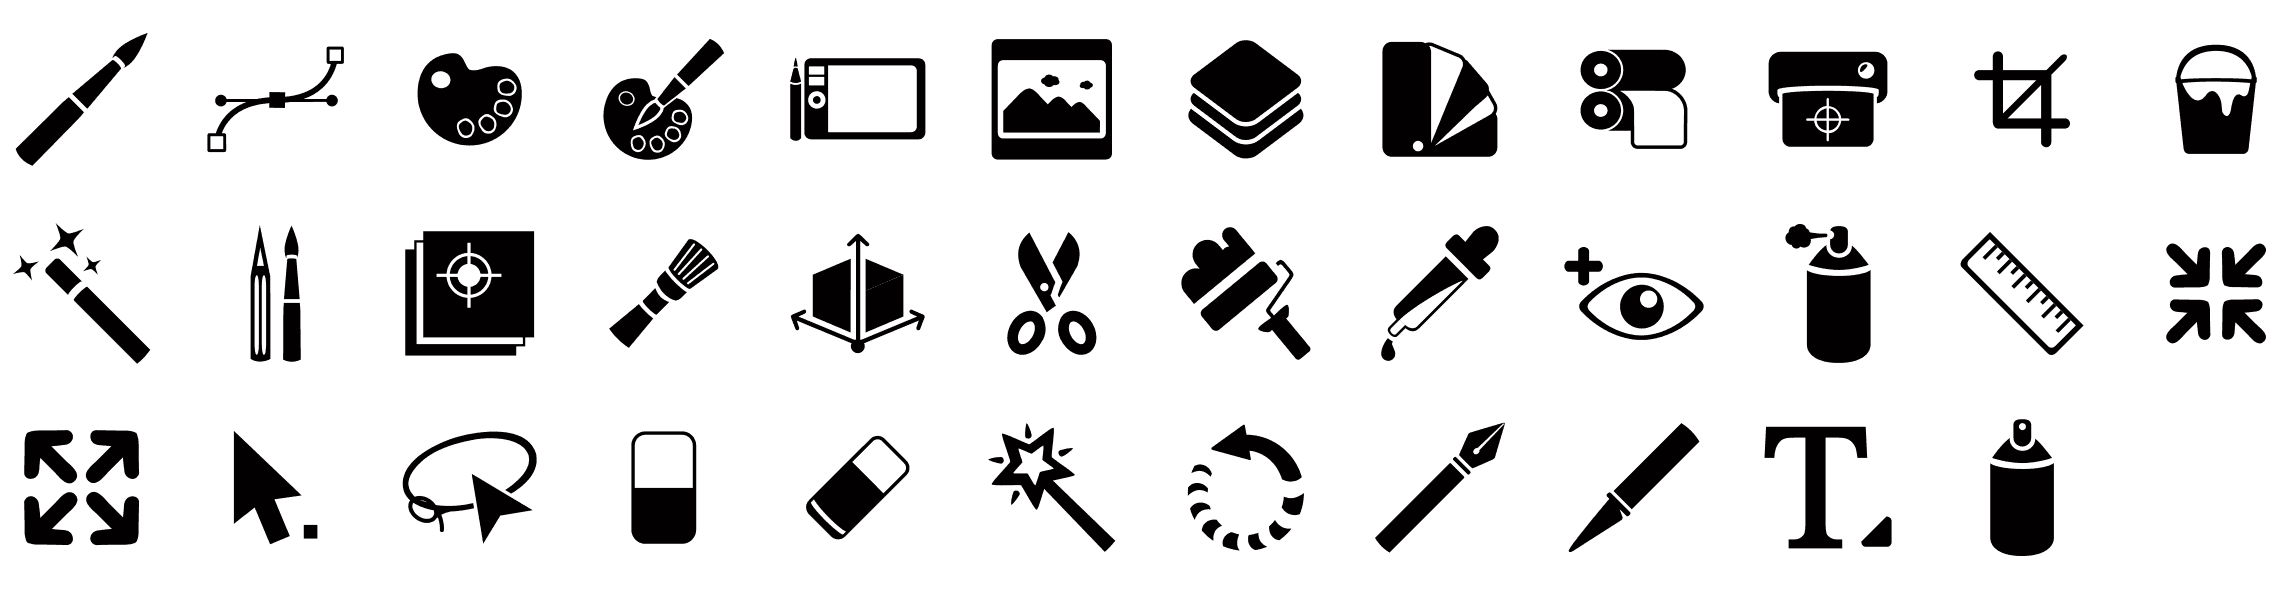 graphic-design-tools-glyph-icons-preview